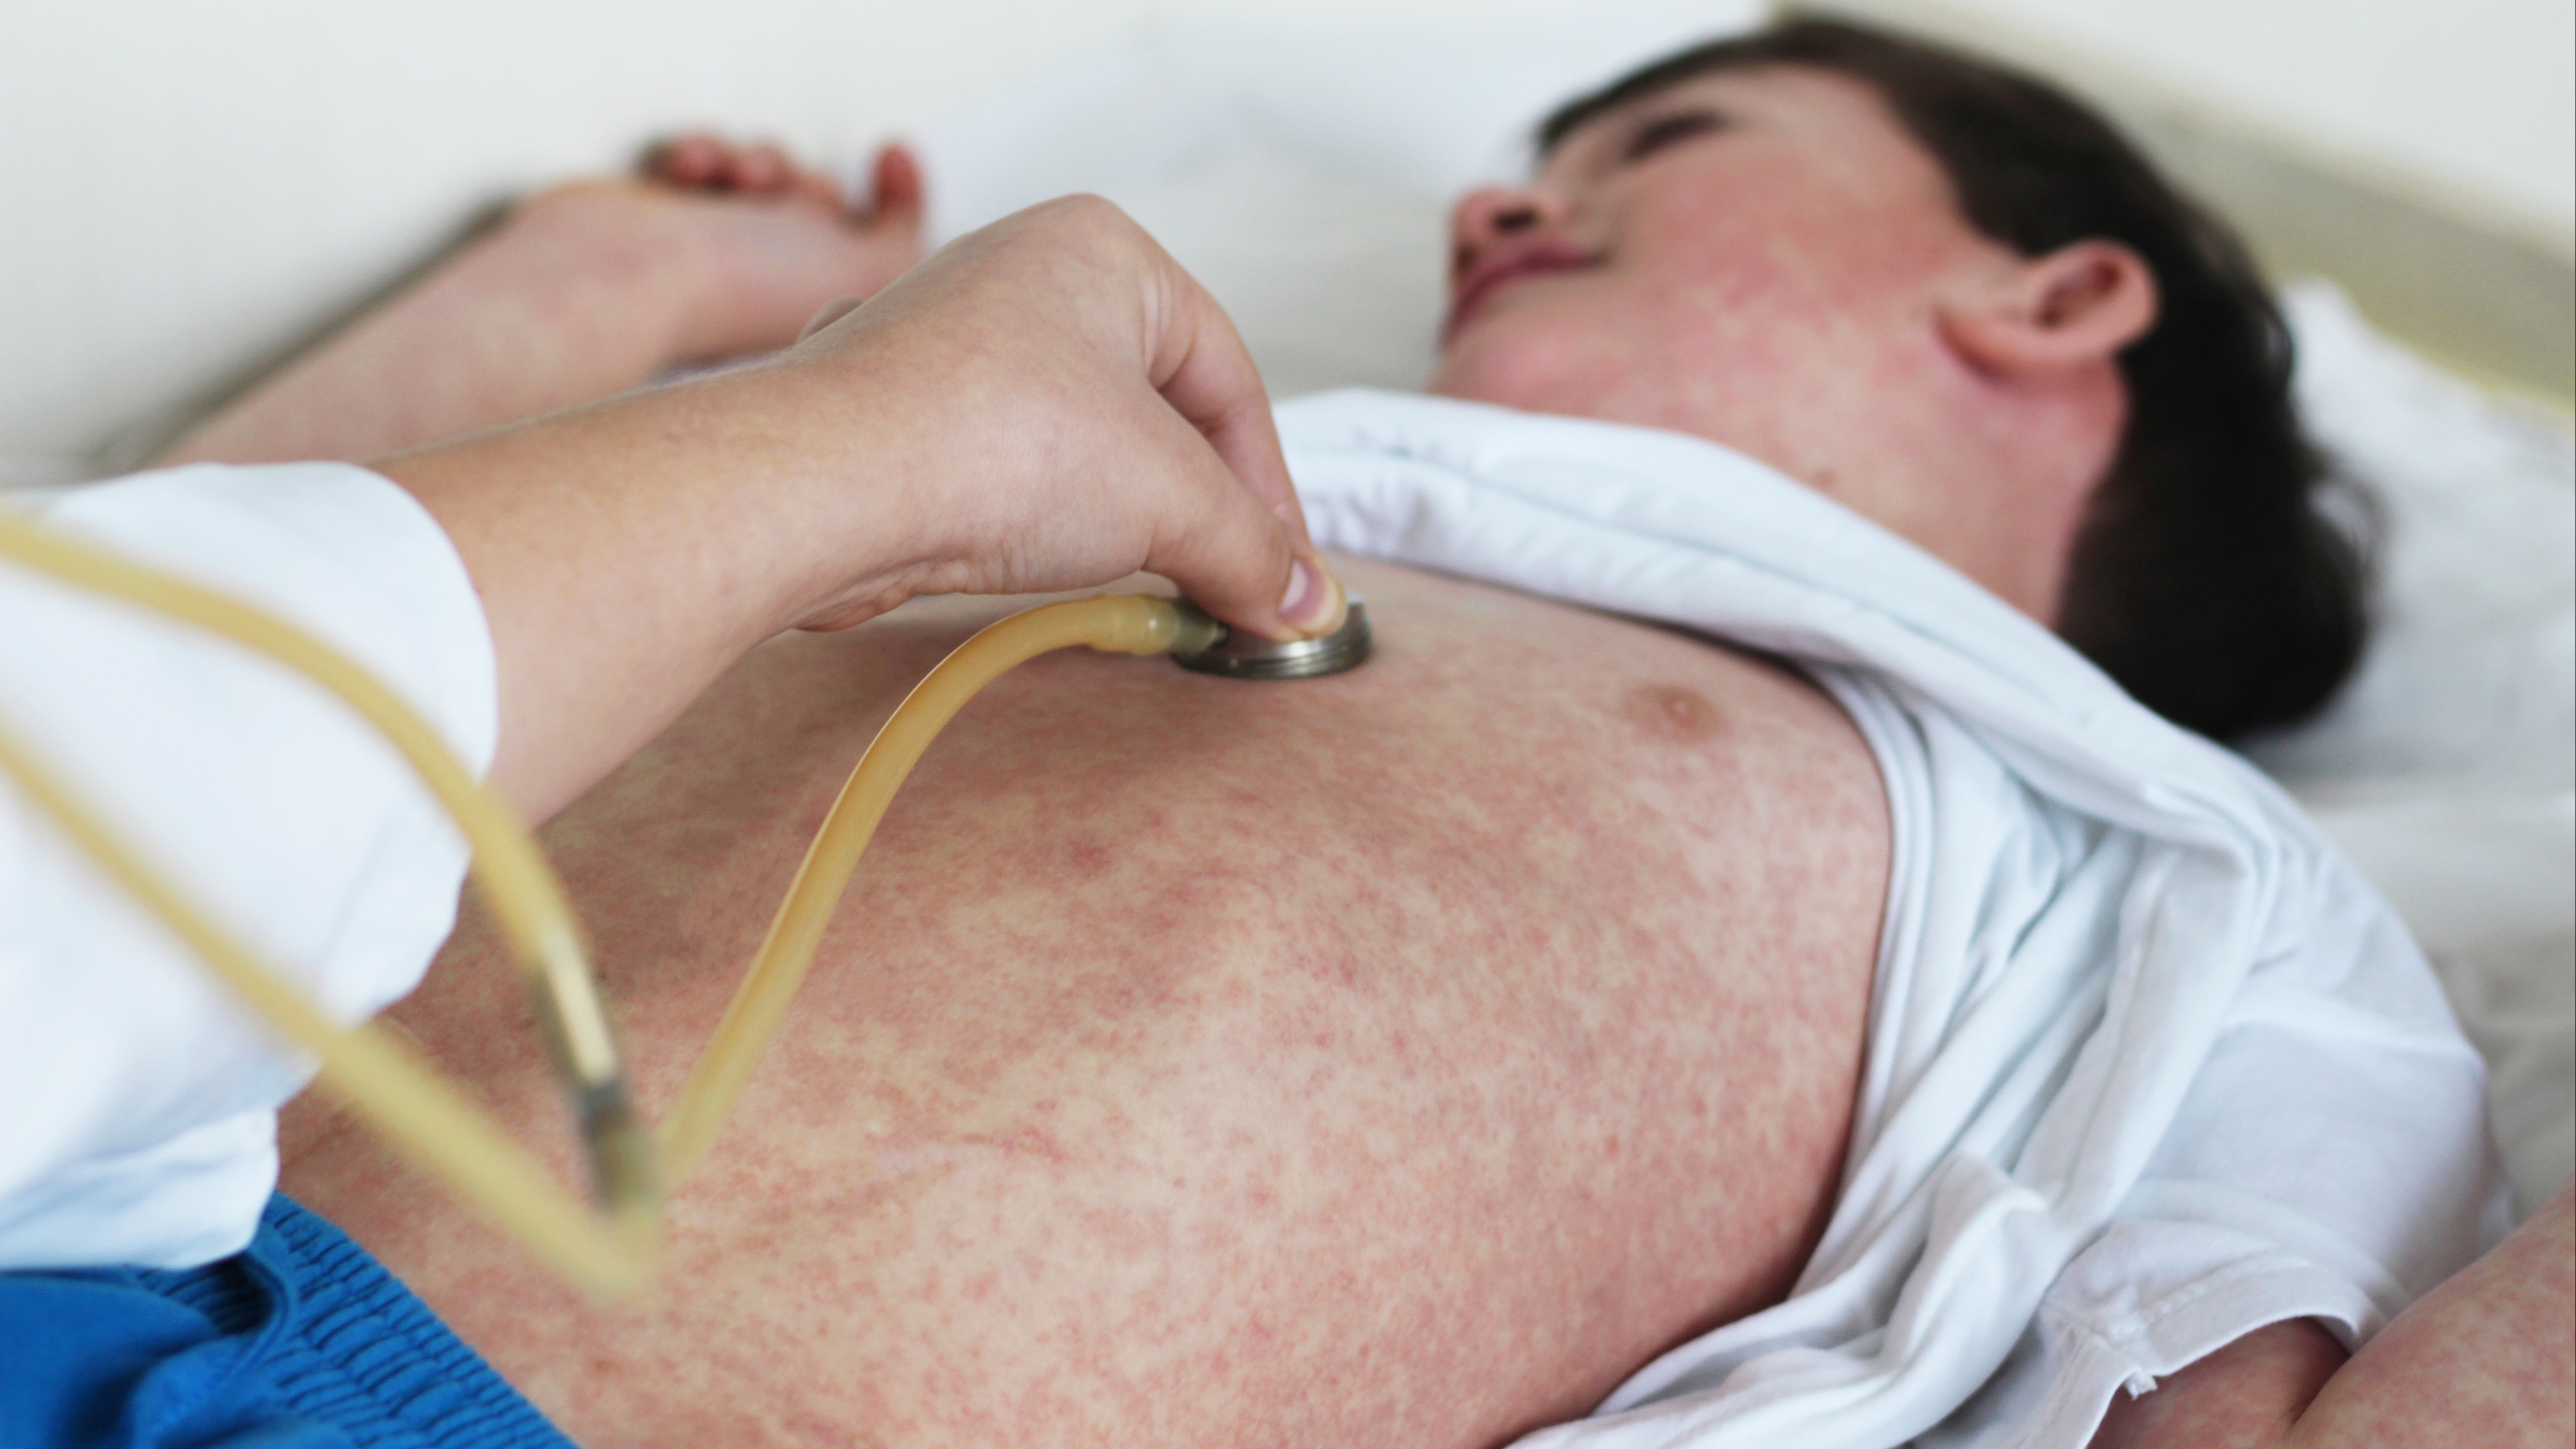 a young boy who is sick with the measles virus and being examined by a health care provider